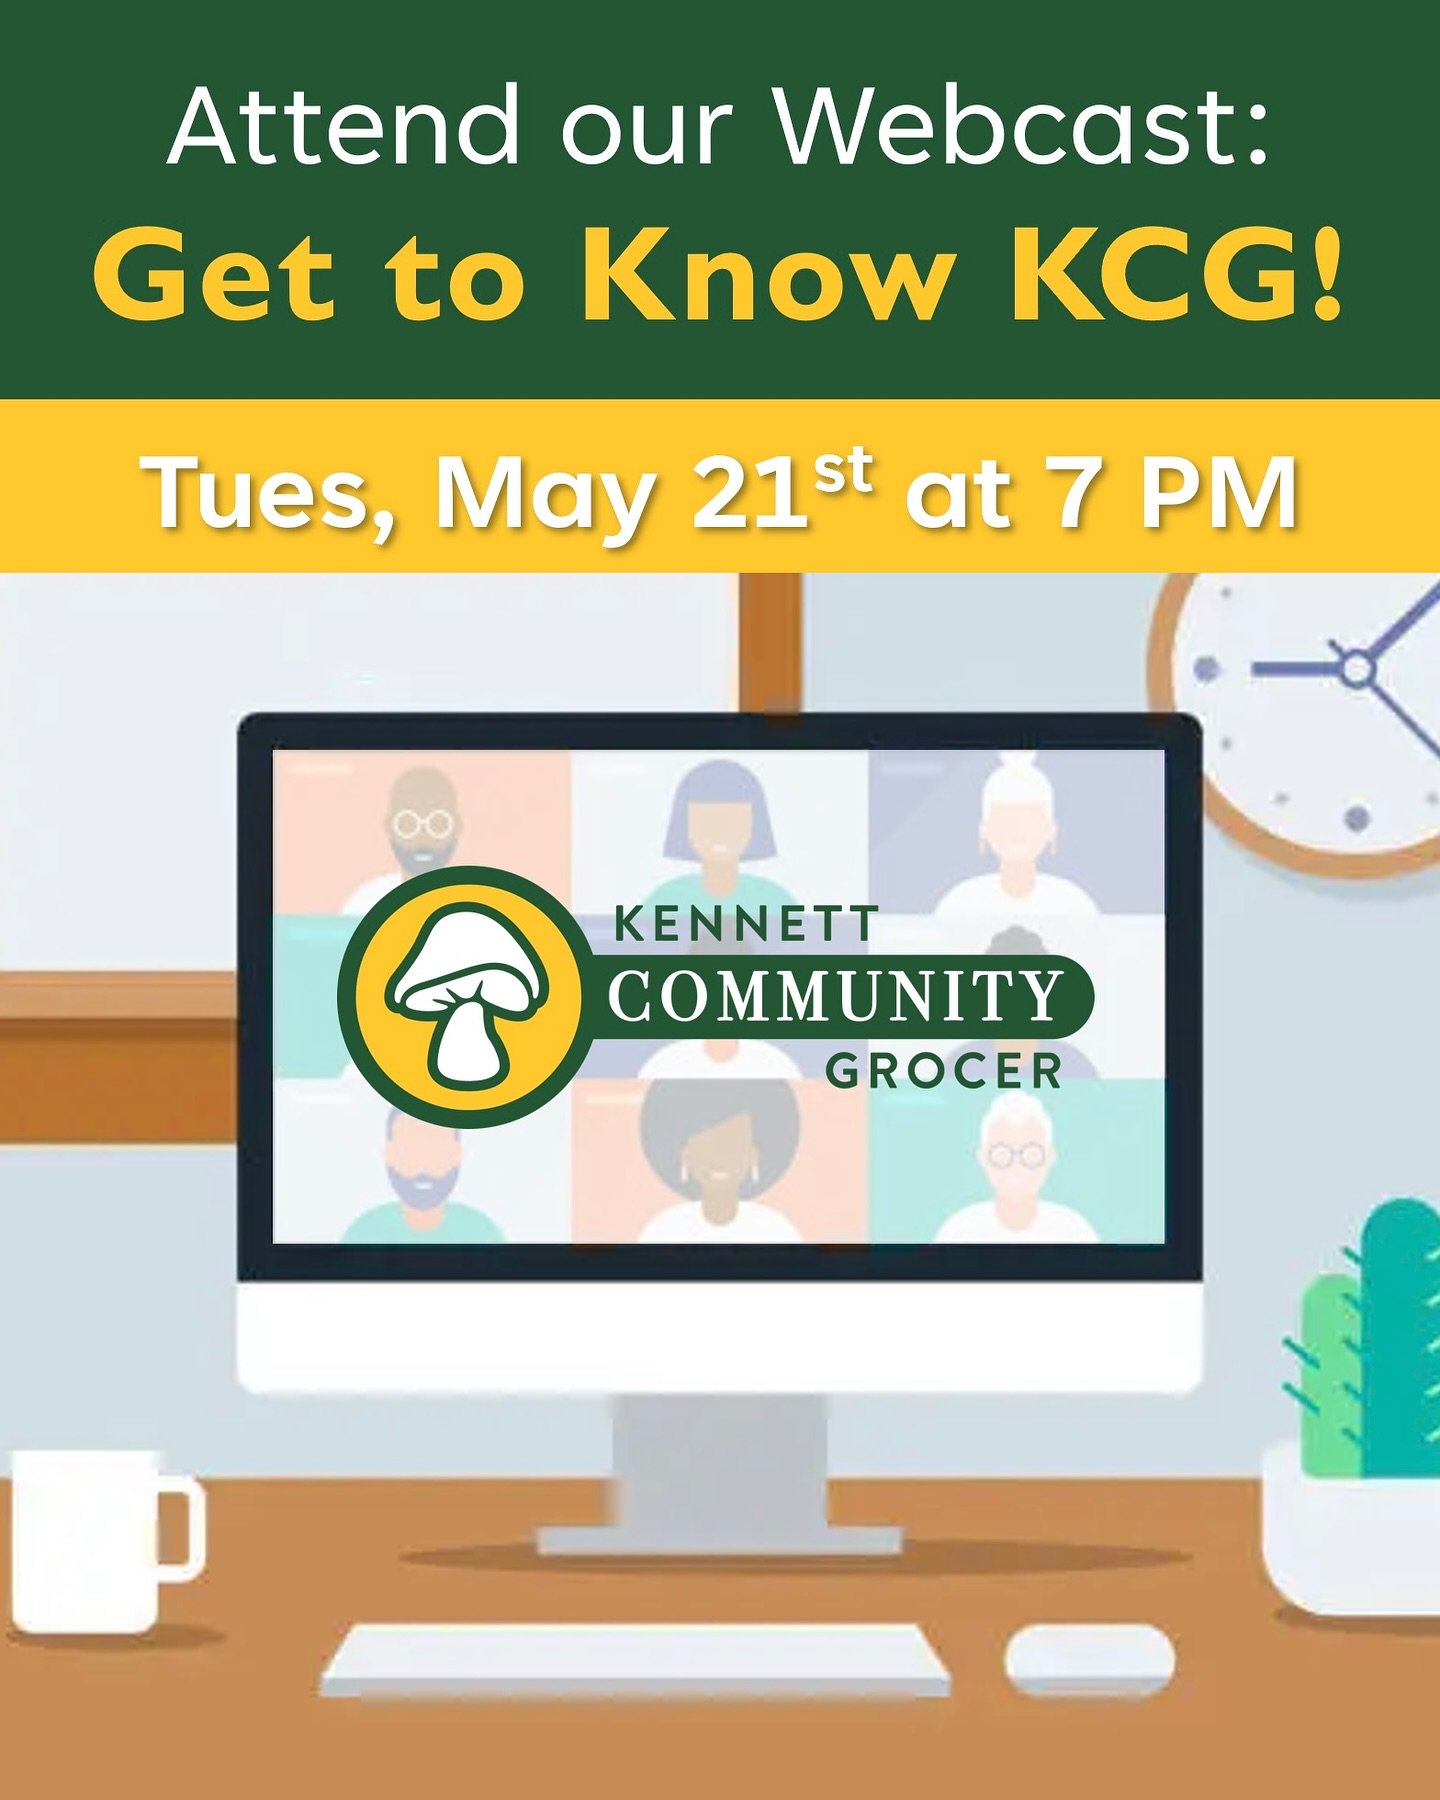 Are you interested in becoming a Member-Owner of KCG, but want to chat with our Board of Directors before taking the plunge? This is the event for you! 😊

Join us for a brief presentation about why we want to build a better grocery store in Kennett 